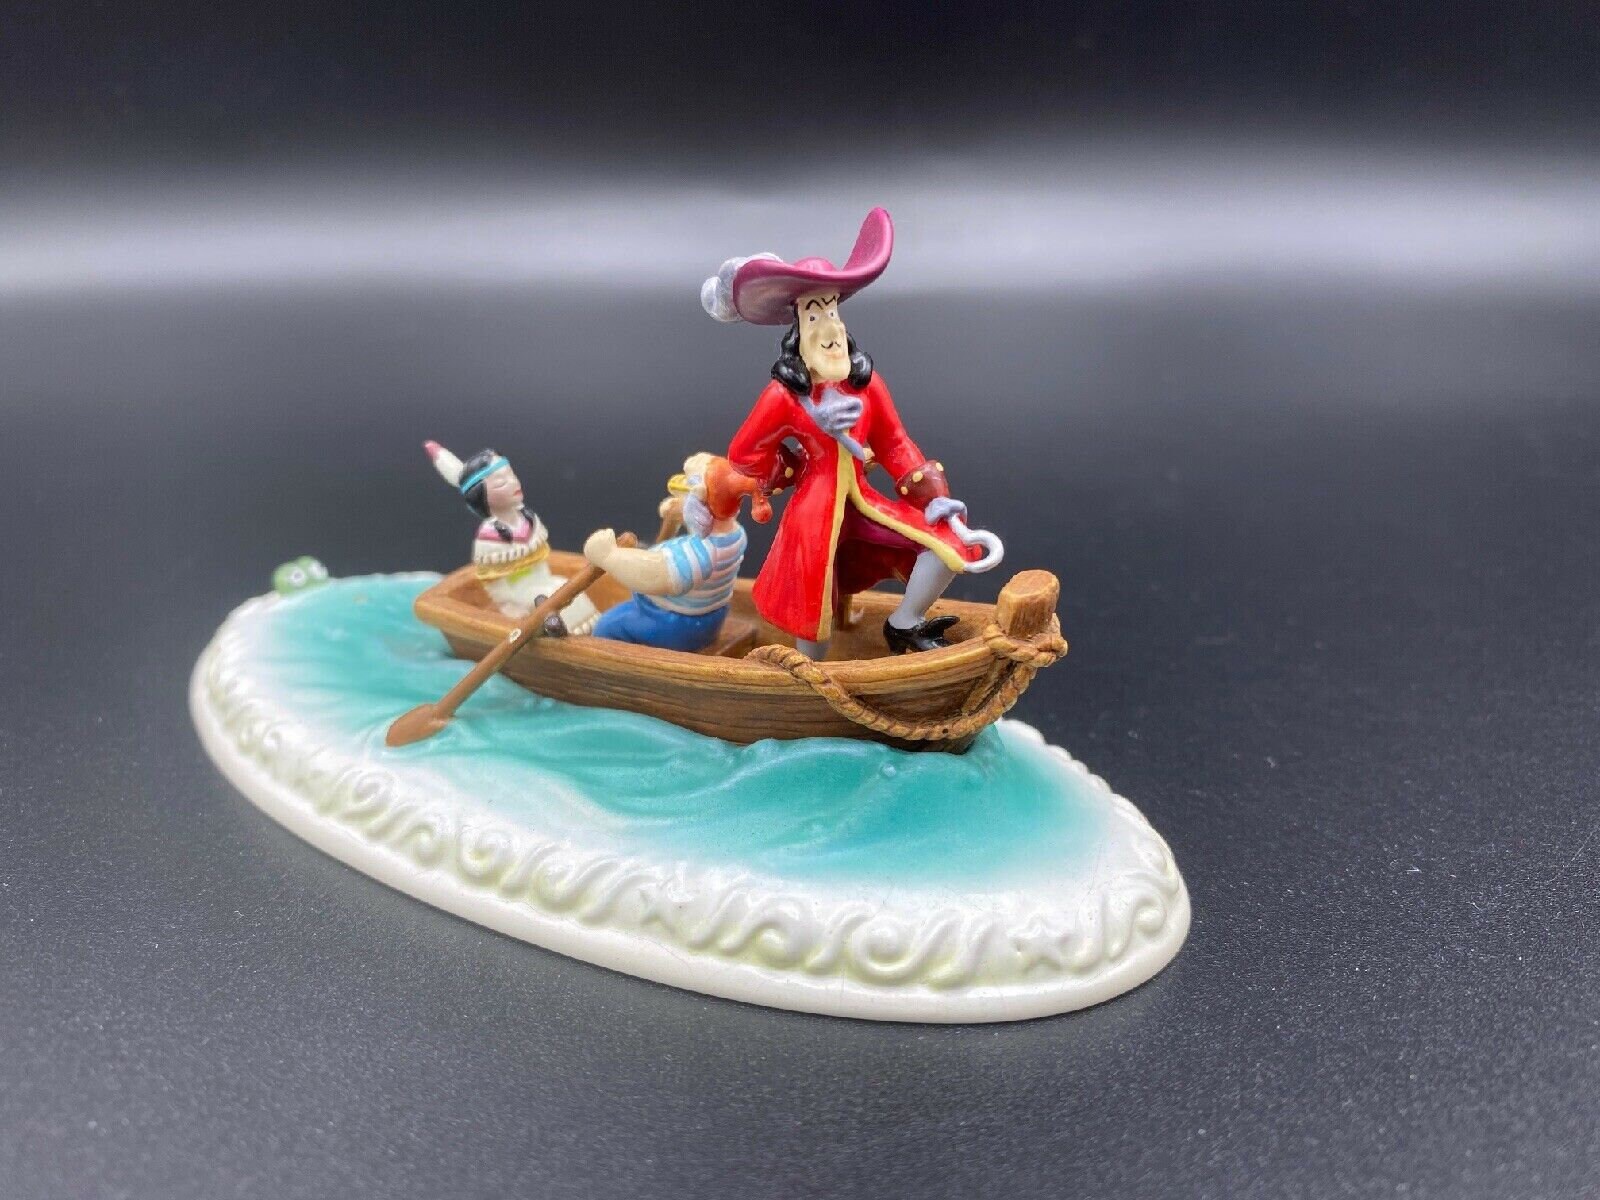 Disney Capitain Hook kidnapped, by OLSZEWSKI From Peter Pan 2001 Figurine -   Canada